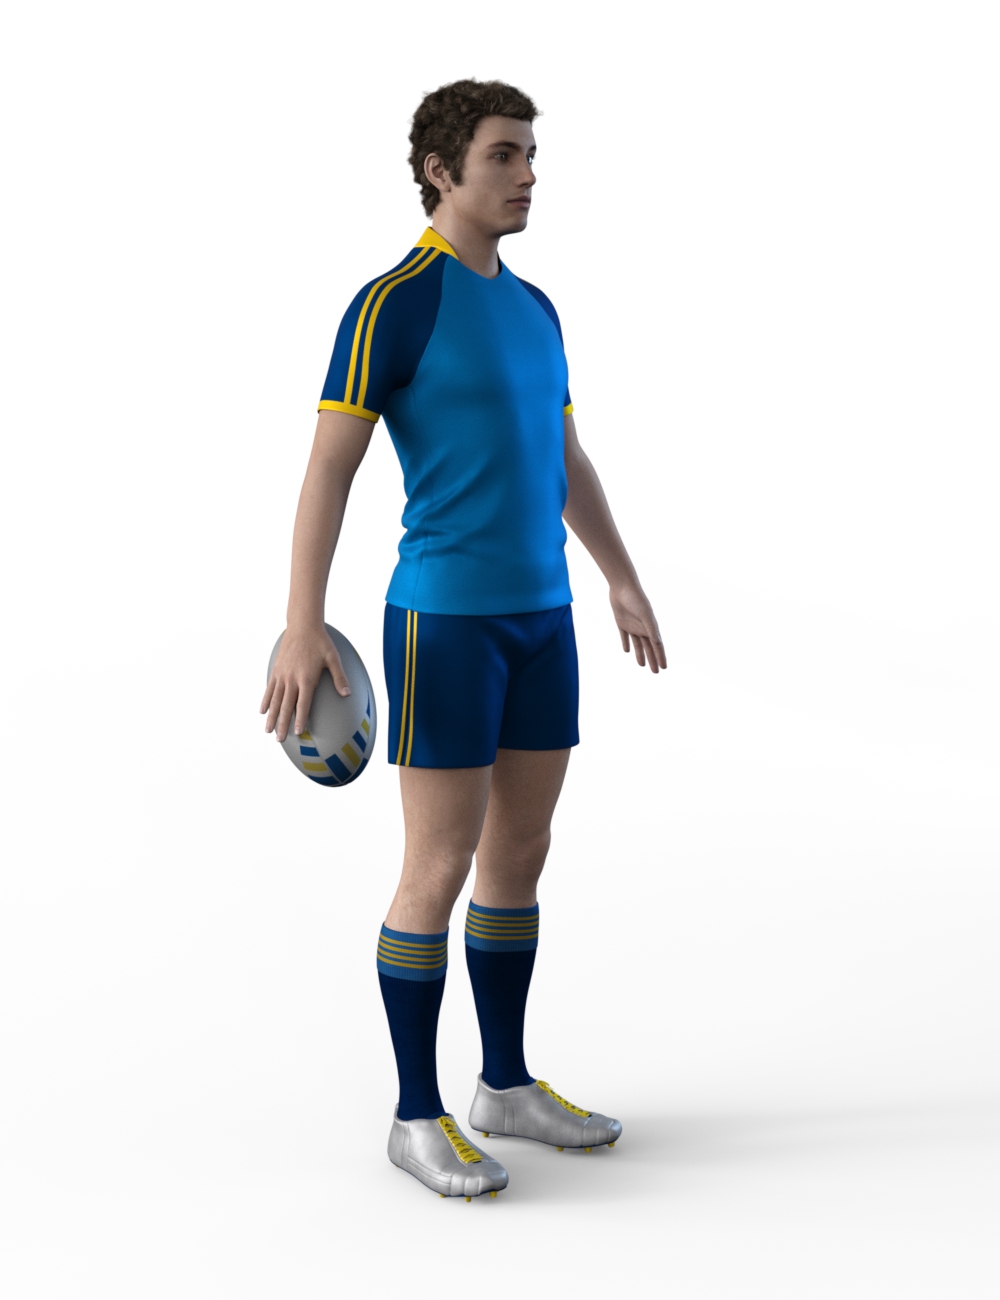 FBX- Base Male Rugby Player by: Paleo, 3D Models by Daz 3D